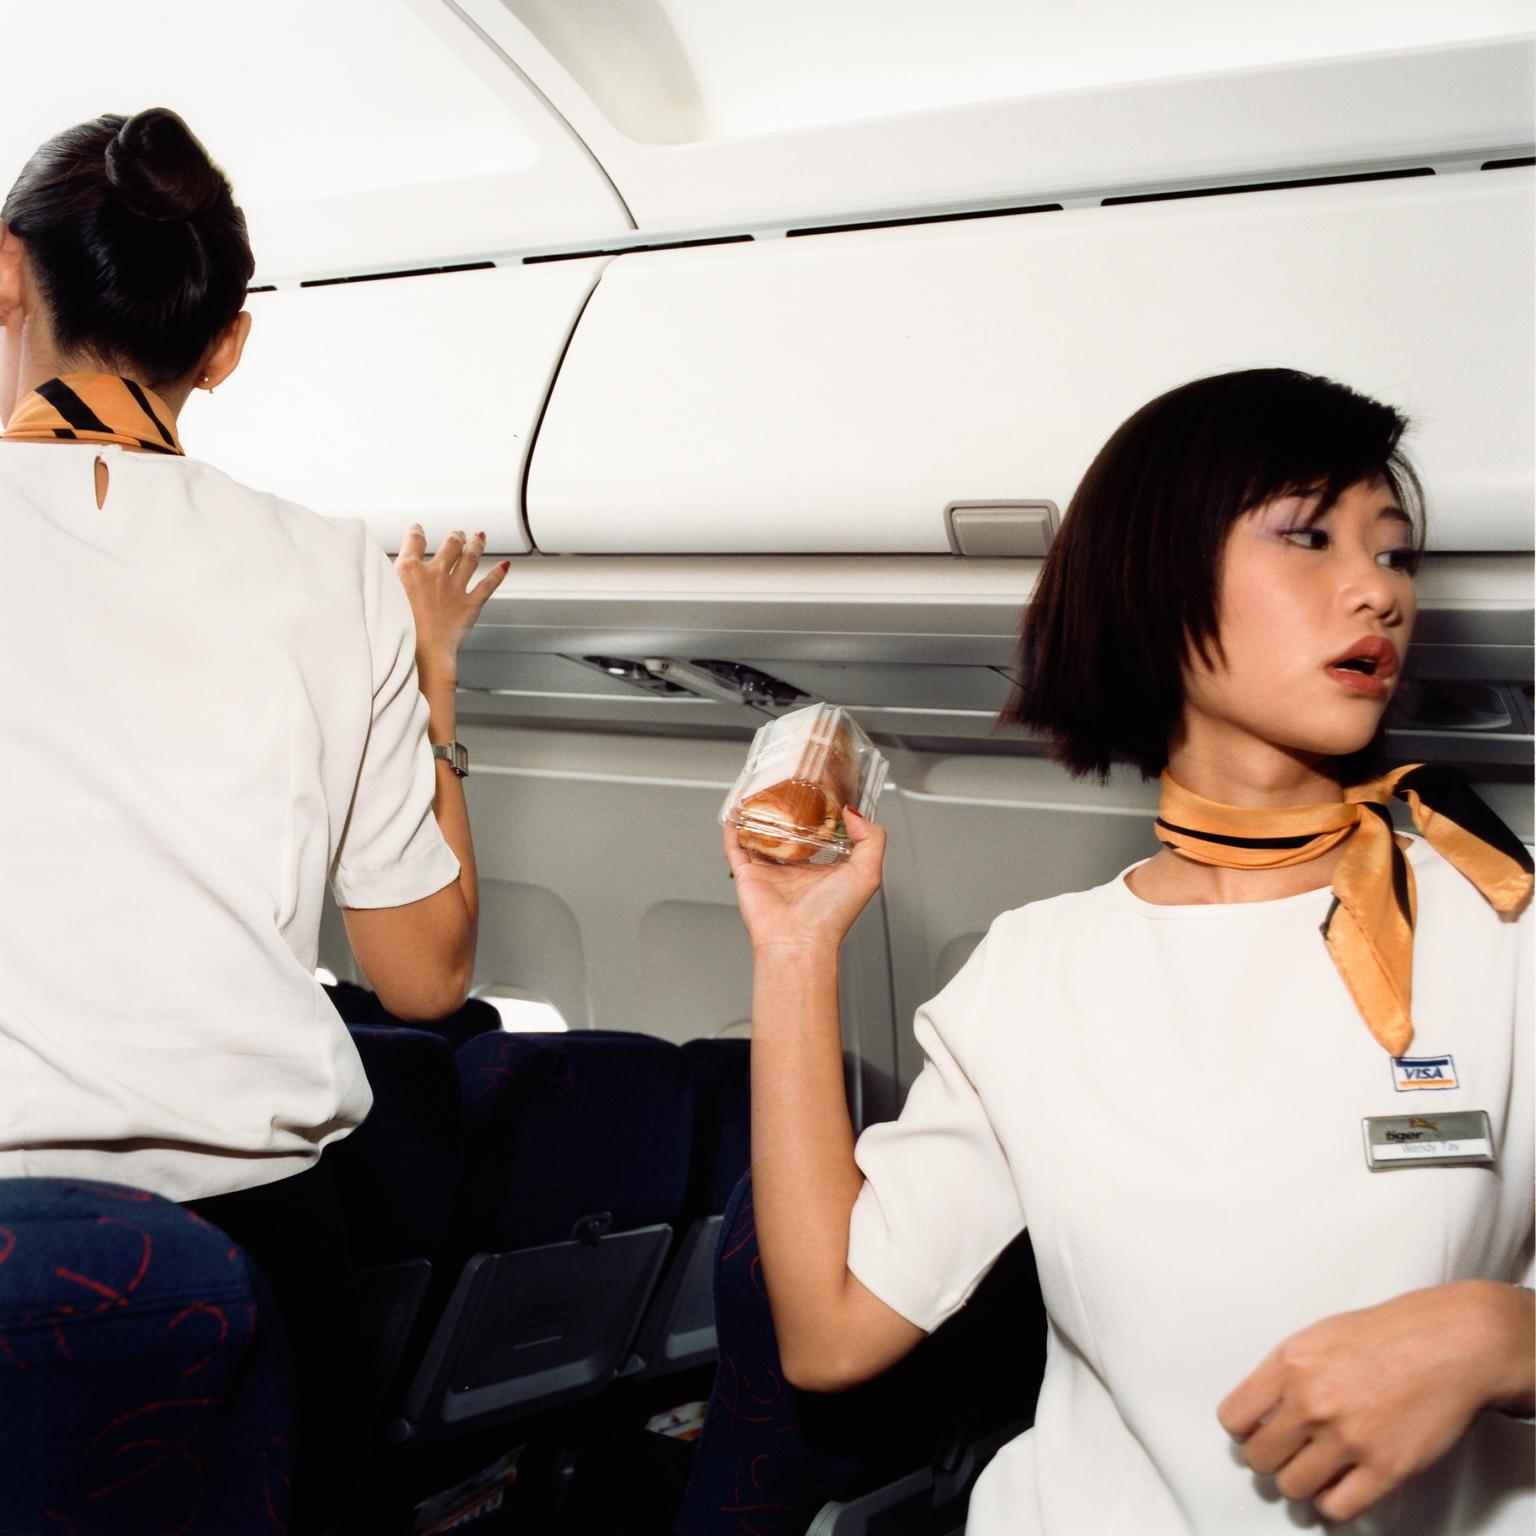 Brian Finke Color Photograph - Untitled (Wenyi and Kate, Tiger Airways)